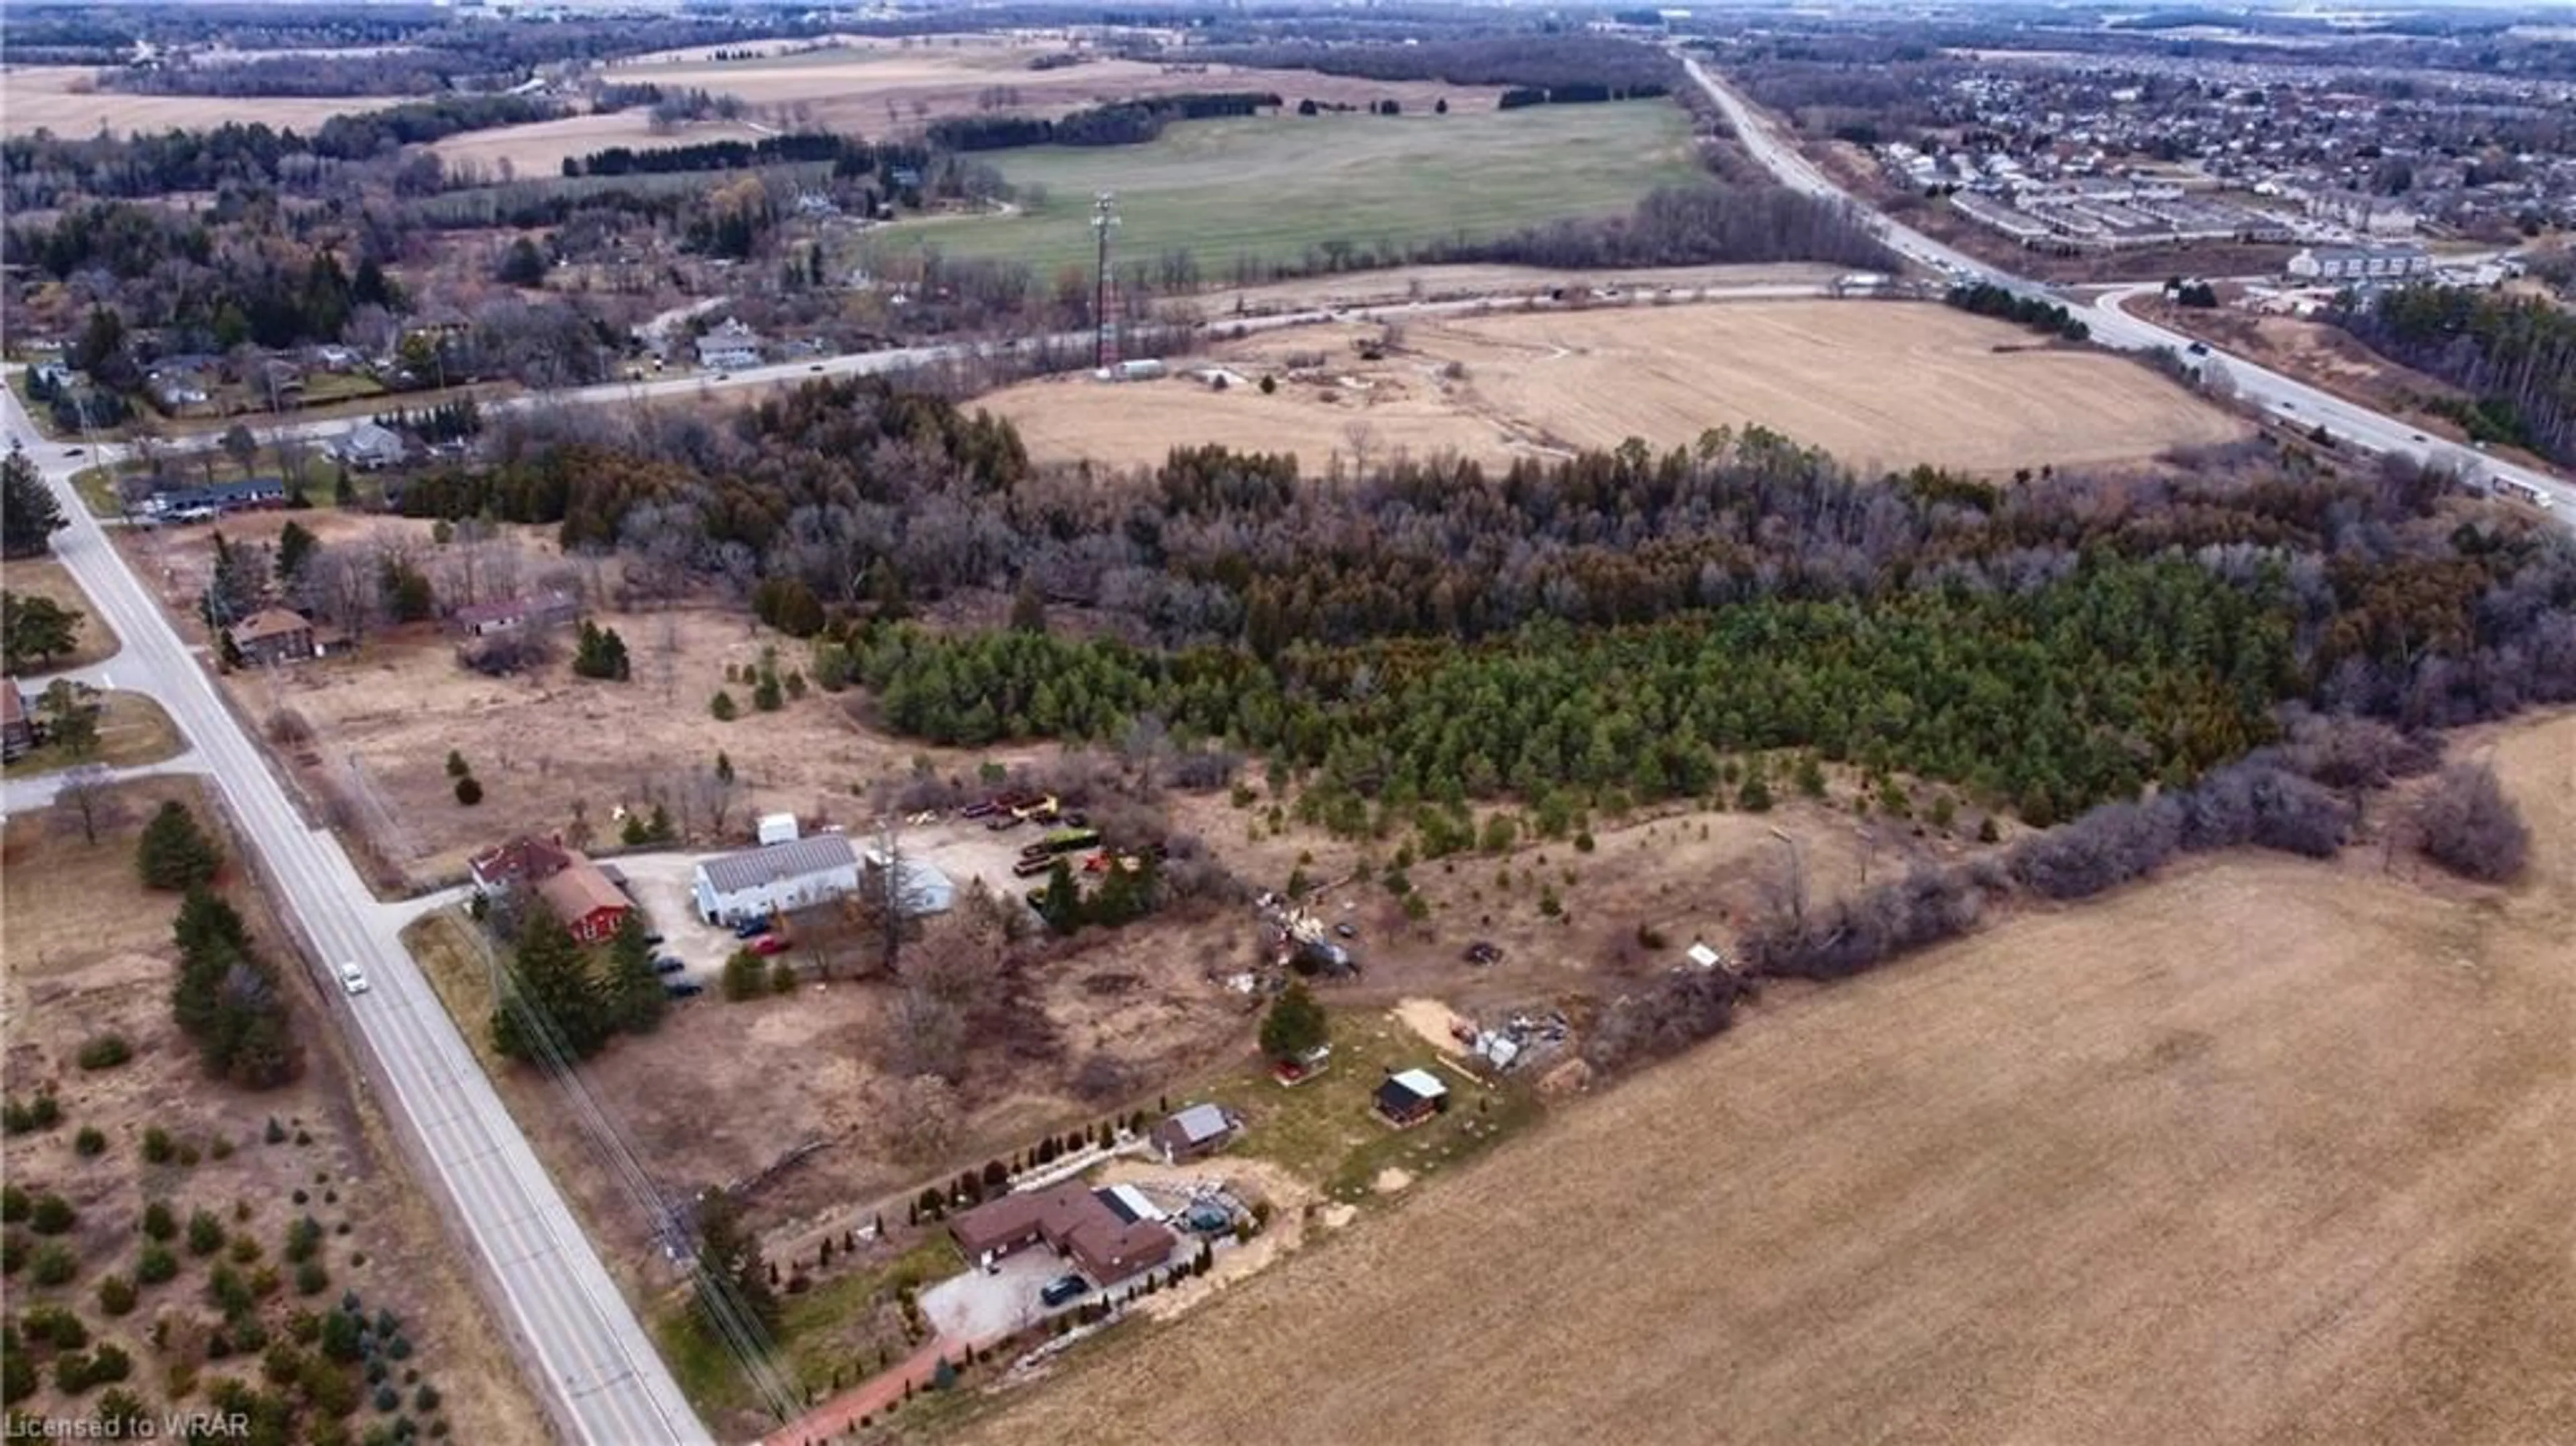 Unknown for 1720 Beaverdale Rd #(15 acres), Cambridge Ontario N3C 2V3